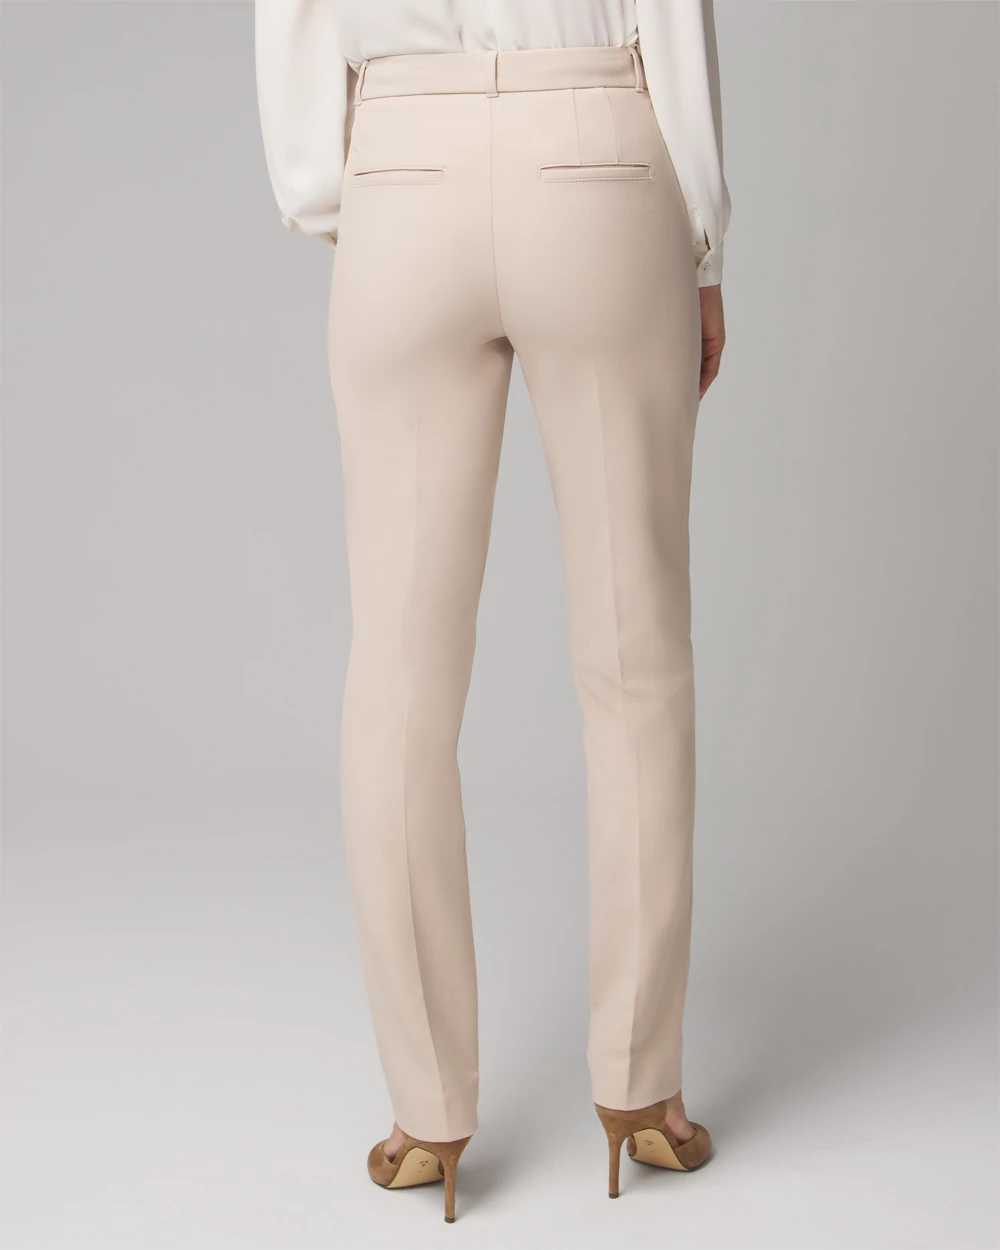 Petite WHBM® Elle Slim Trouser Comfort Stretch Pant click to view larger image.